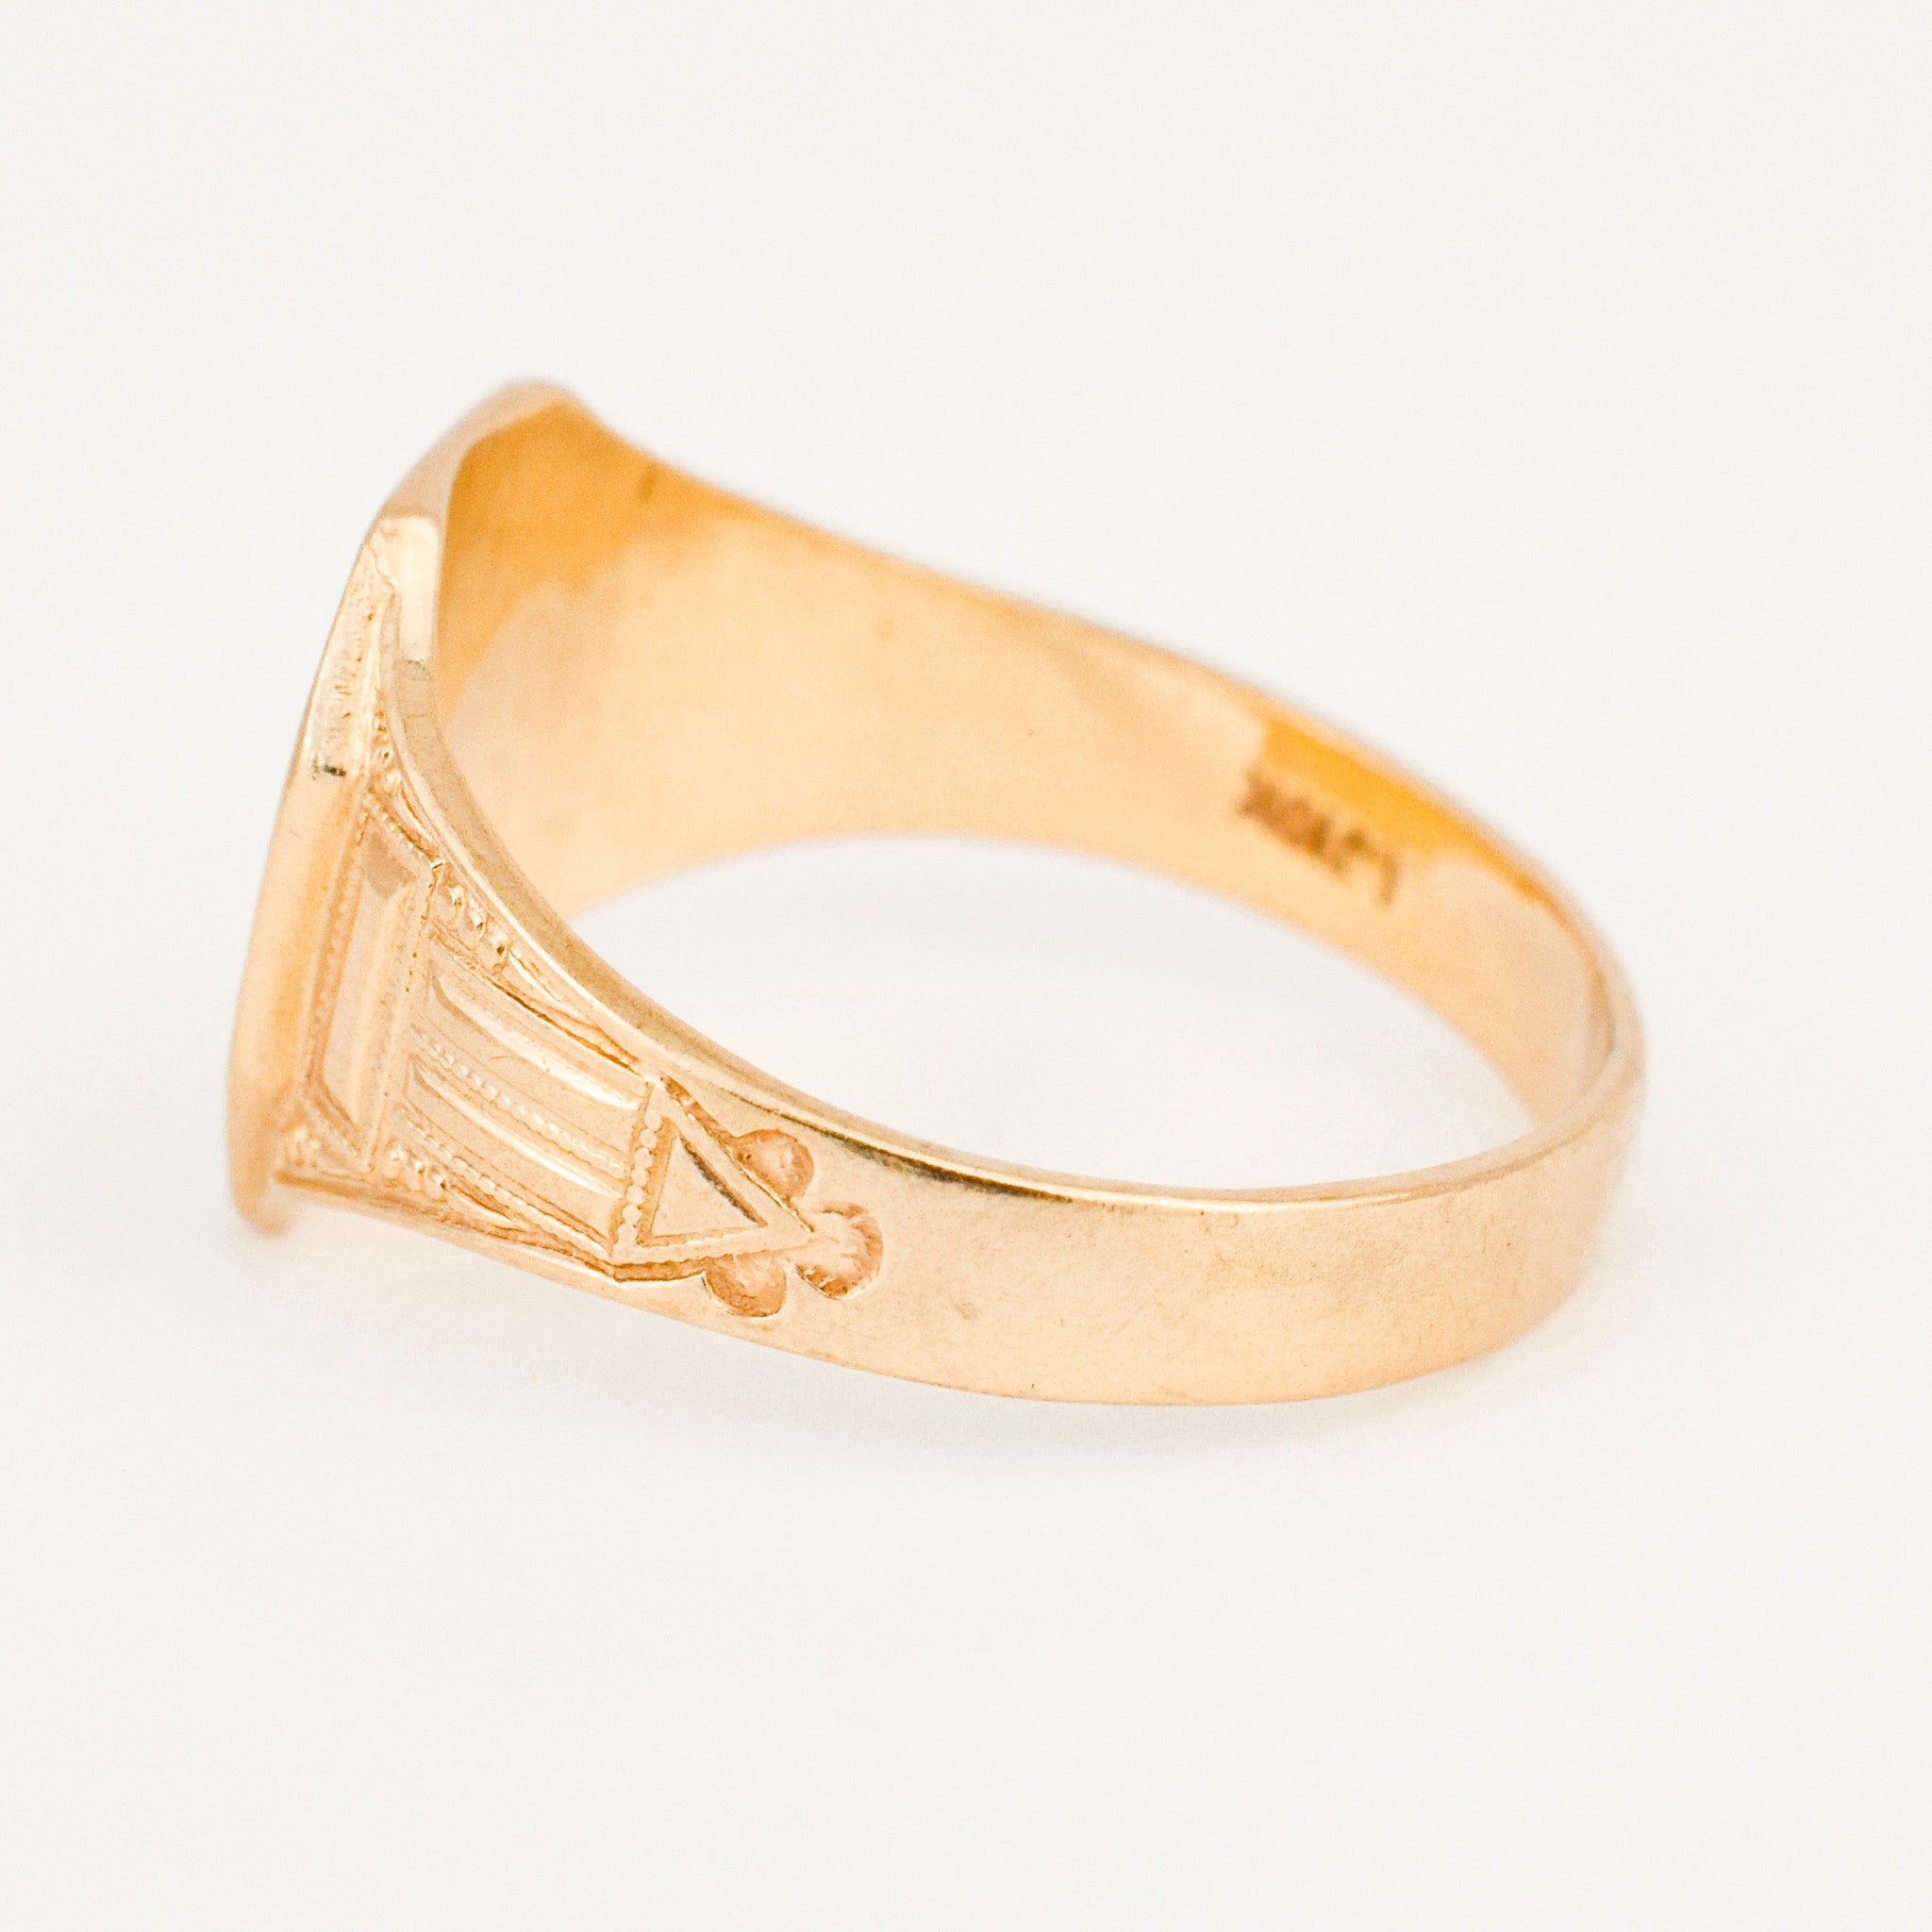 'A' Signet Ring